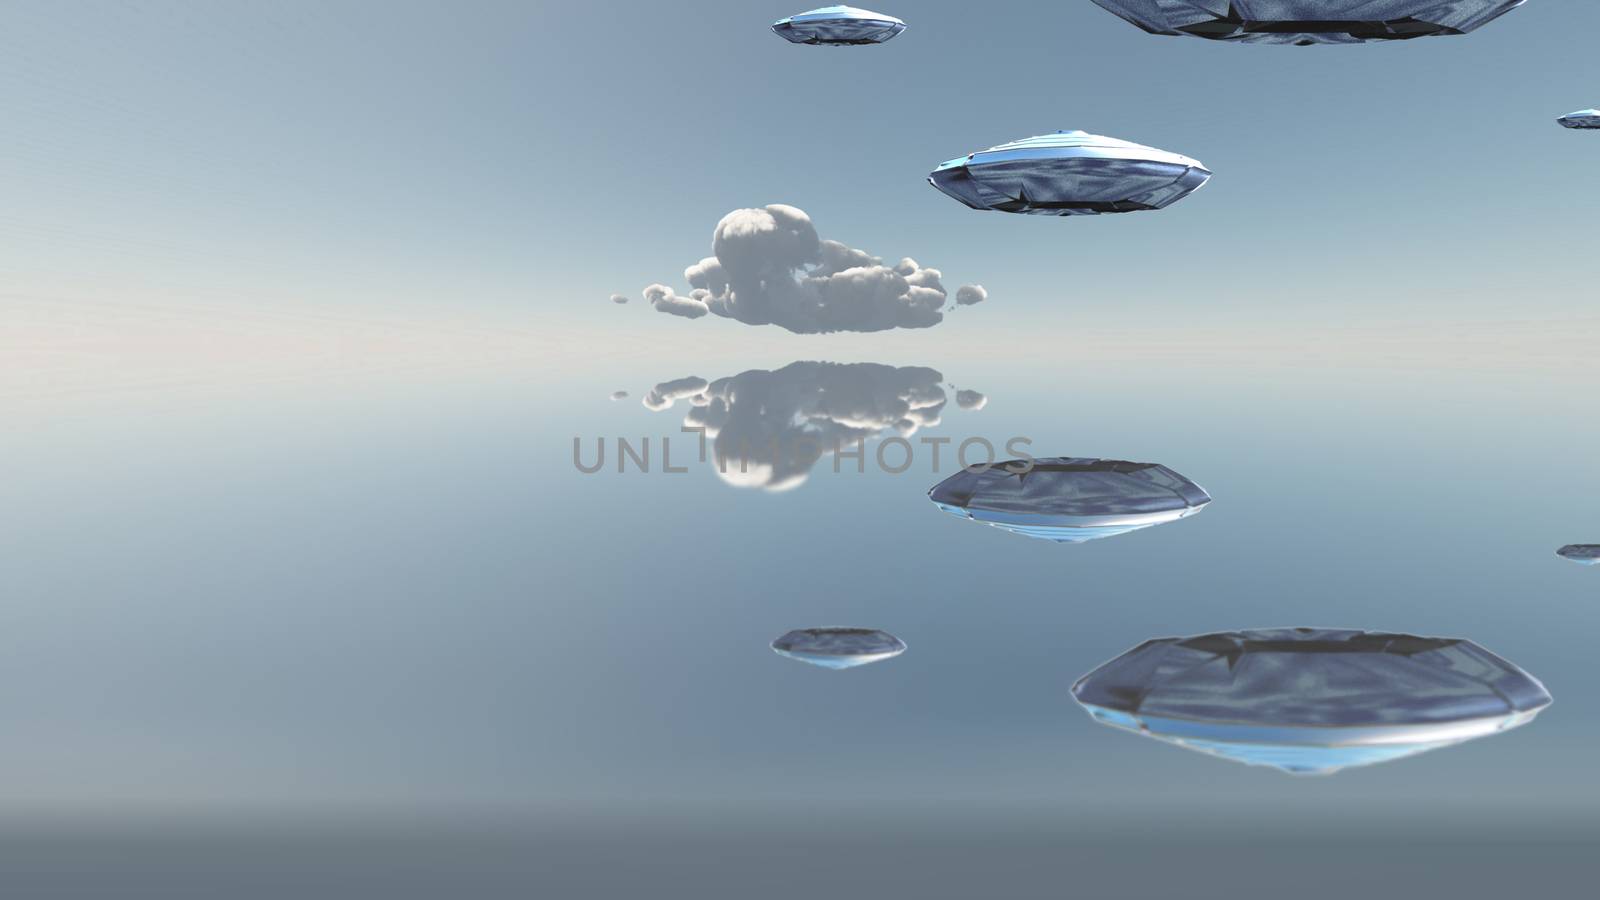 Flying saucers over water surface by applesstock